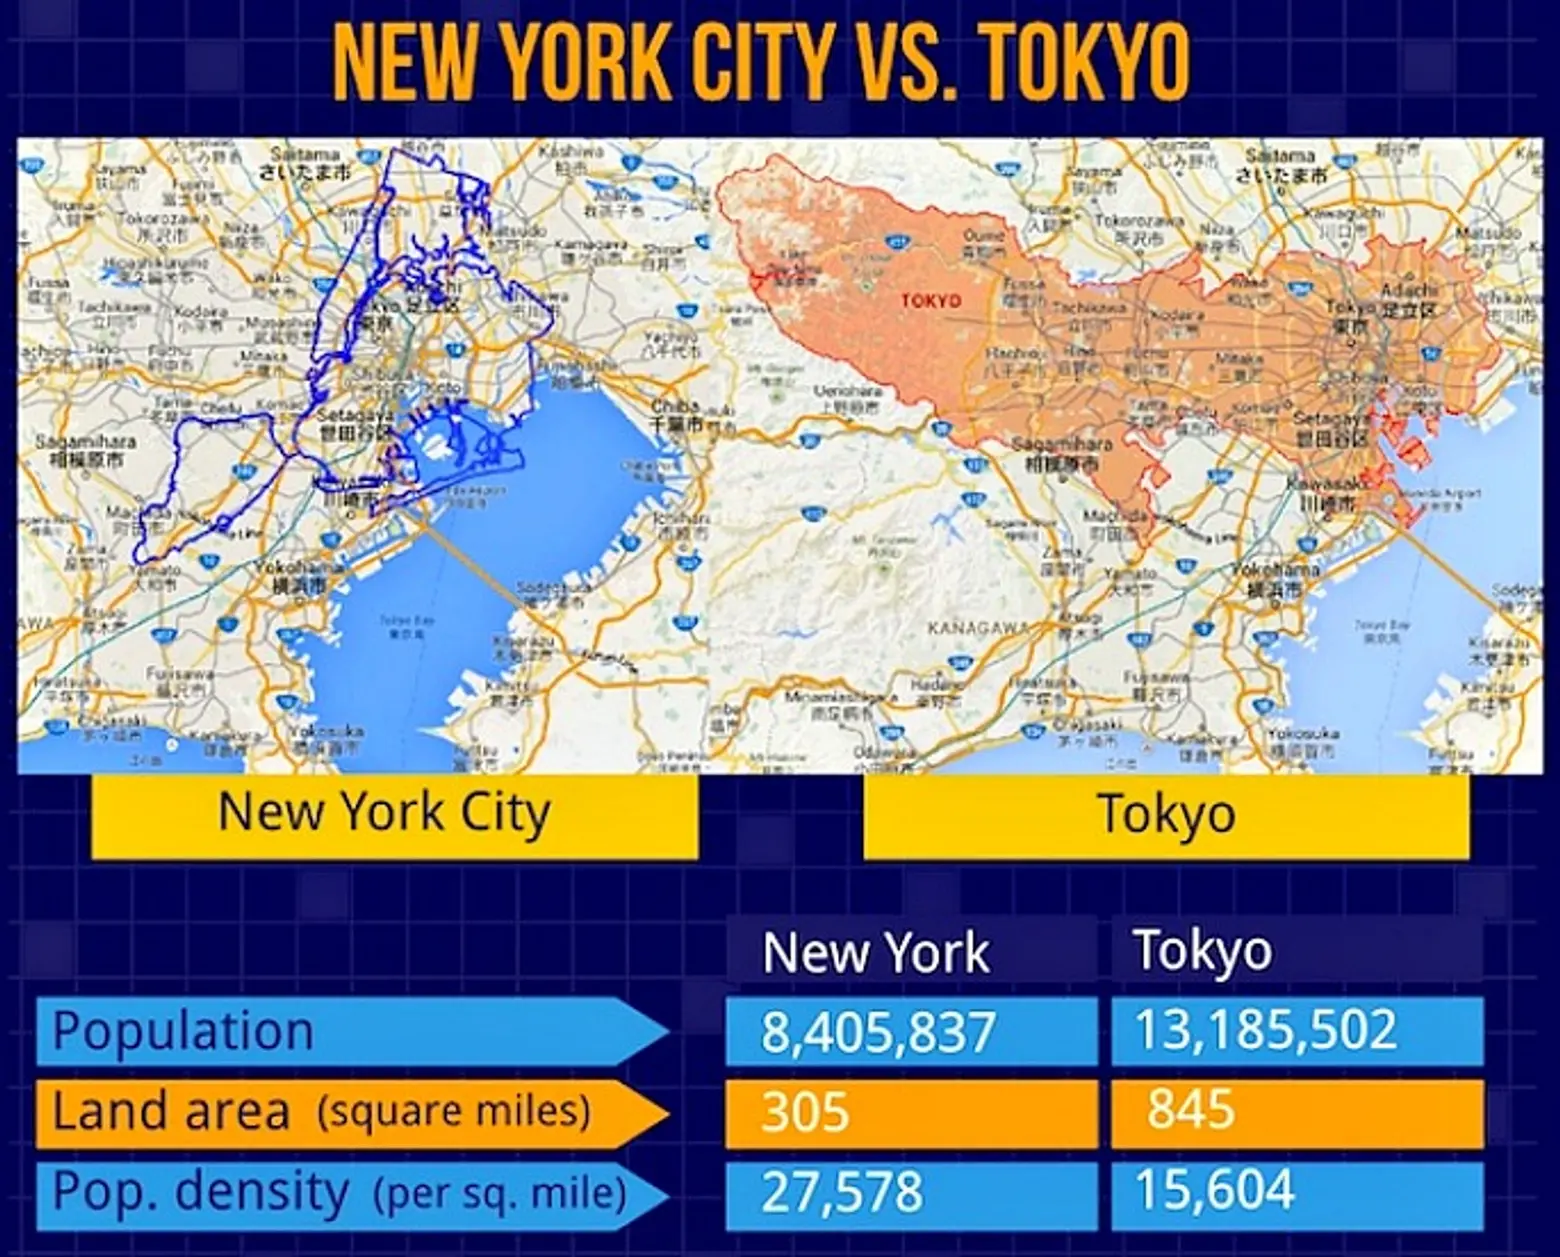 Amazing Maps - The size of Japan compared to the East